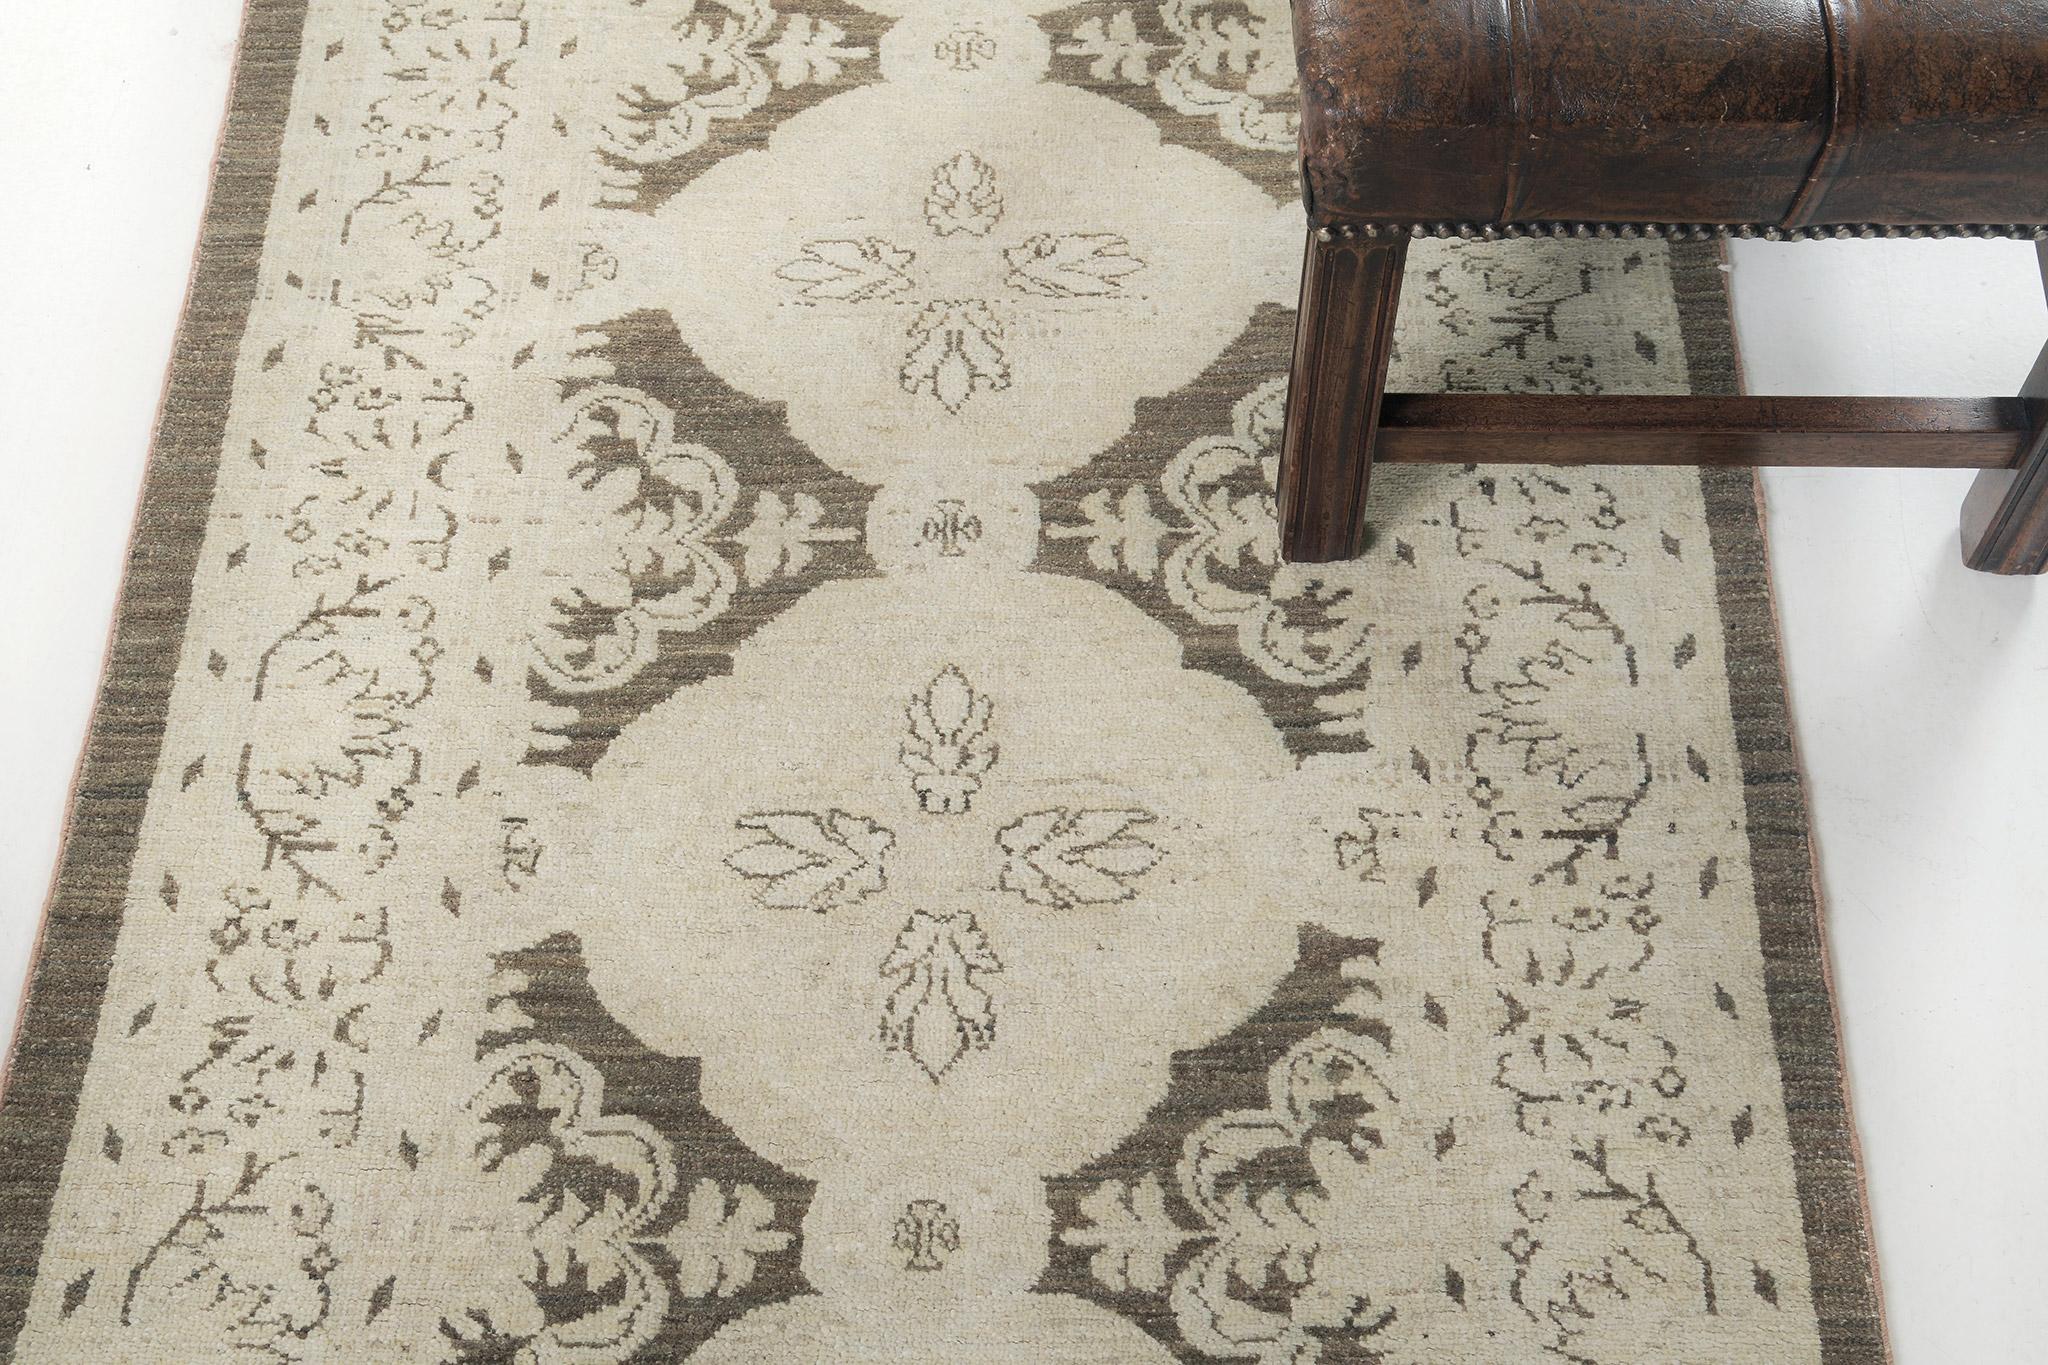 An astounding revival of Arts and Crafts Style runner that features the elegant umber brown. The symmetrical pattern over a panel of the diamonds in the middle is fabricated gracefully in a neutral scheme. Fancy embellishments are formed flawlessly